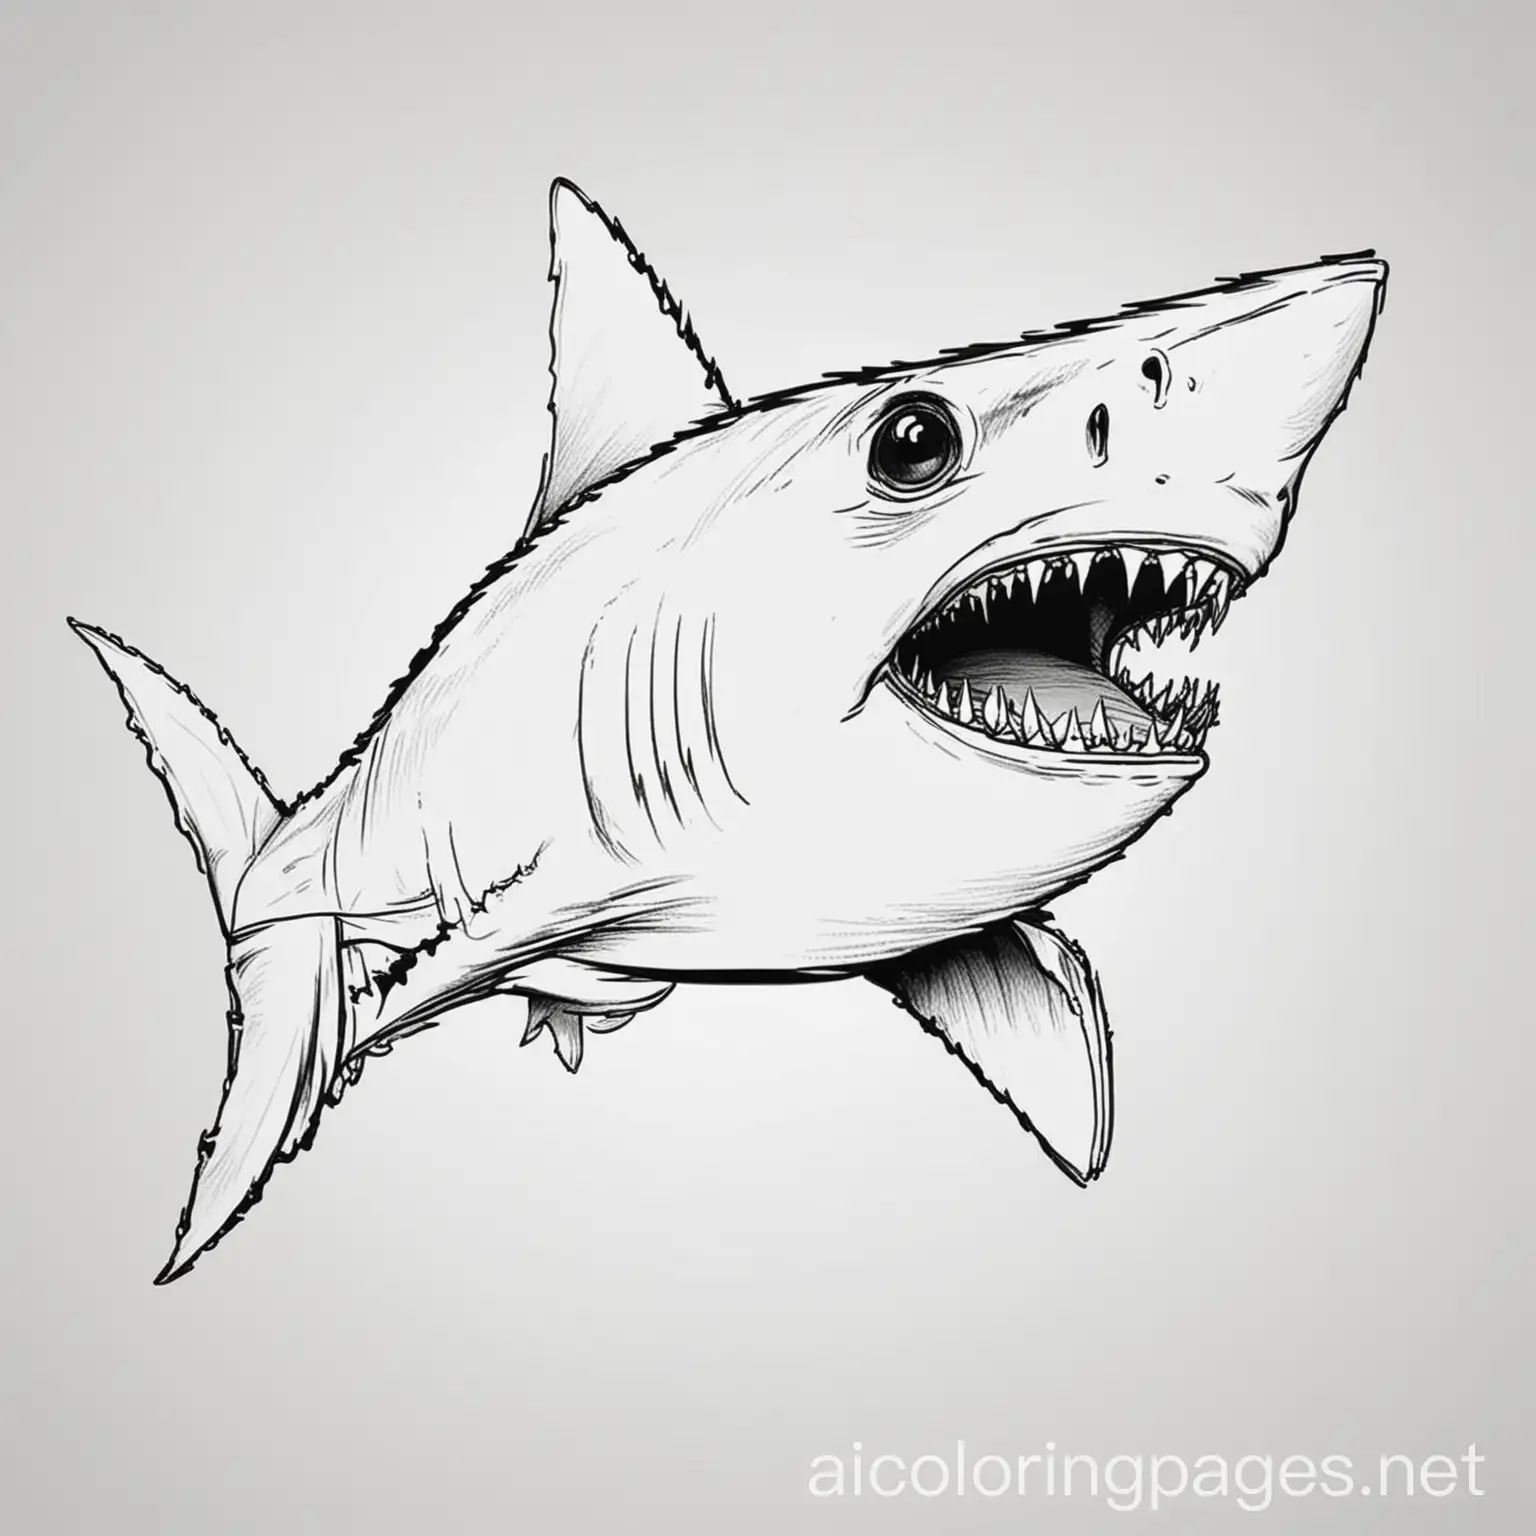 Fearsome-Shark-Coloring-Page-Bold-Black-and-White-Line-Art-for-Kids